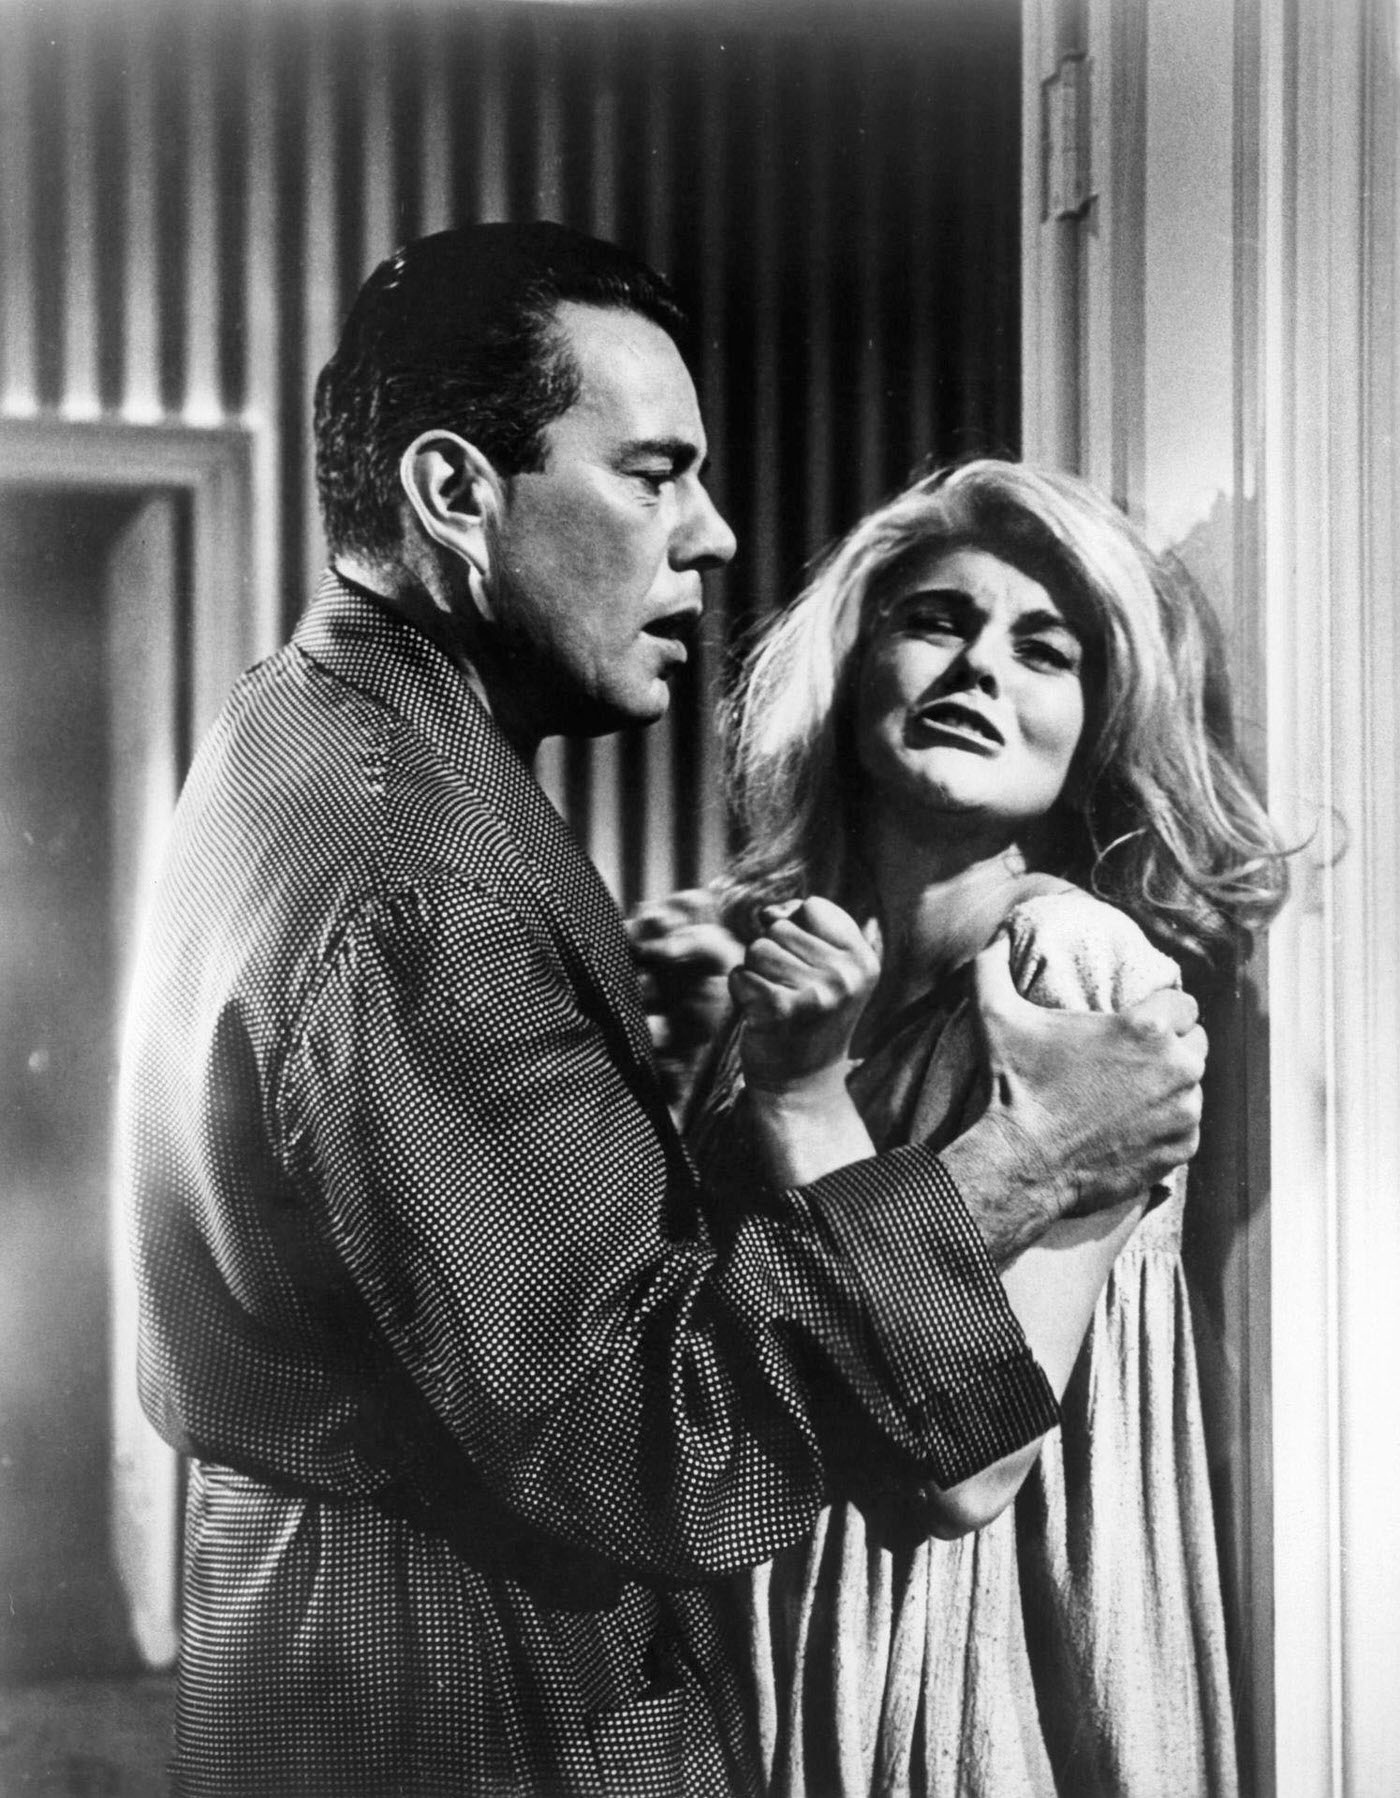 John Forsythe attempts to subdue Ann Margret in a scene from the film 'Kitten With A Whip', 1964.